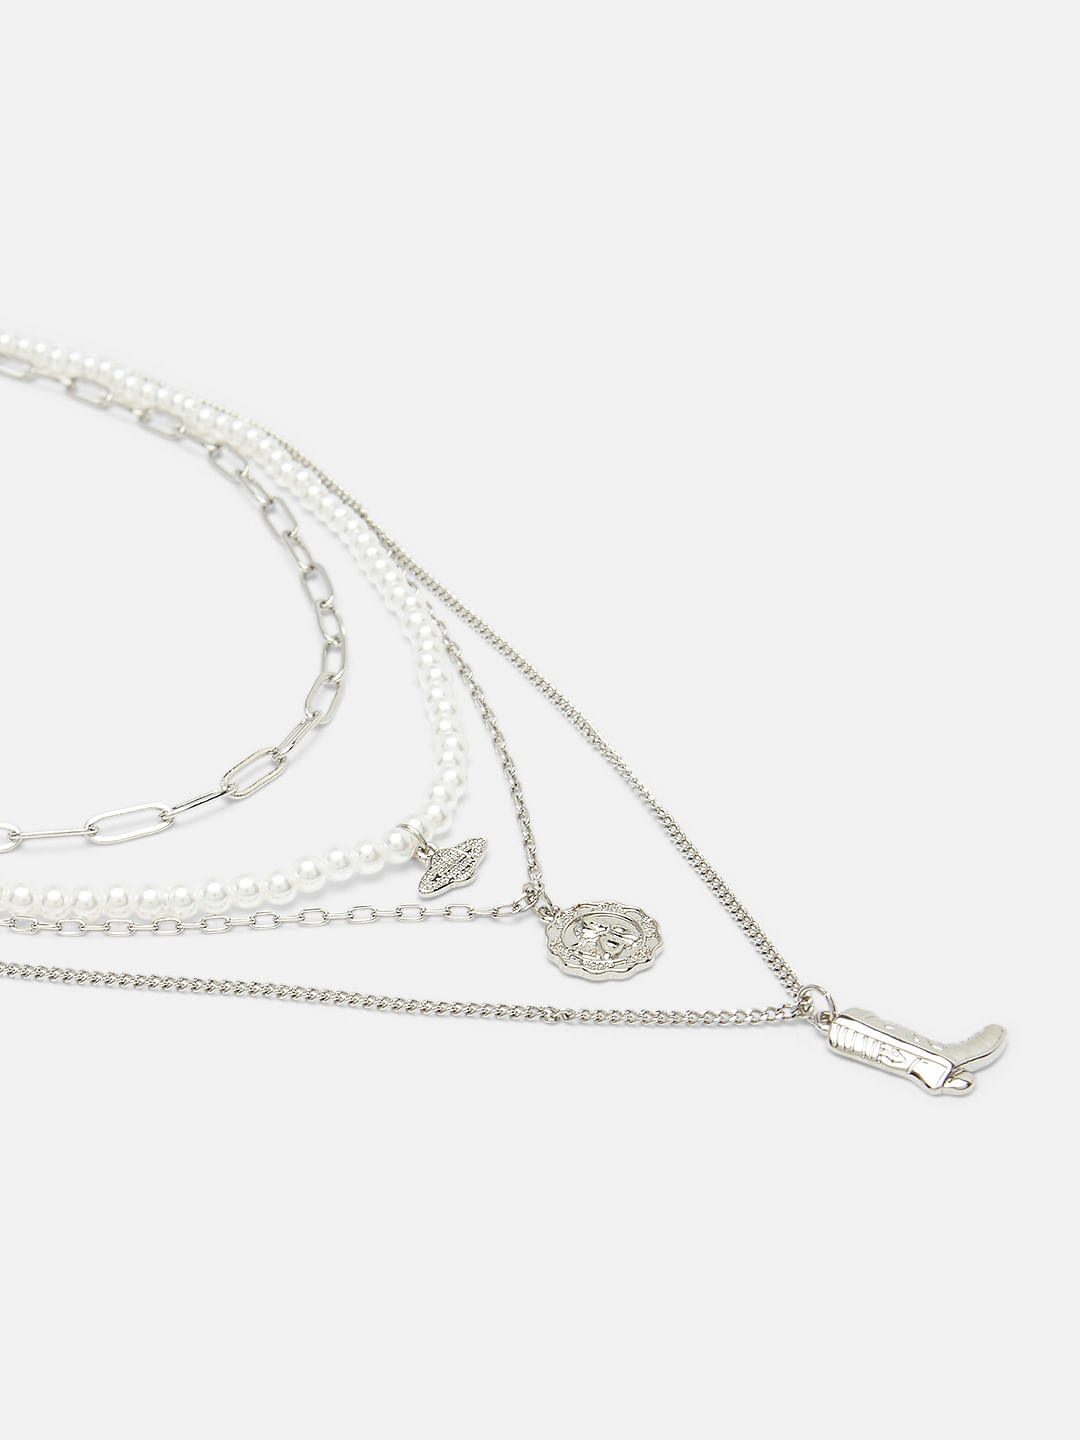 14k WHITE GOLD DANGLING LETRAS NECKLACE | Patty Q's Jewelry Inc